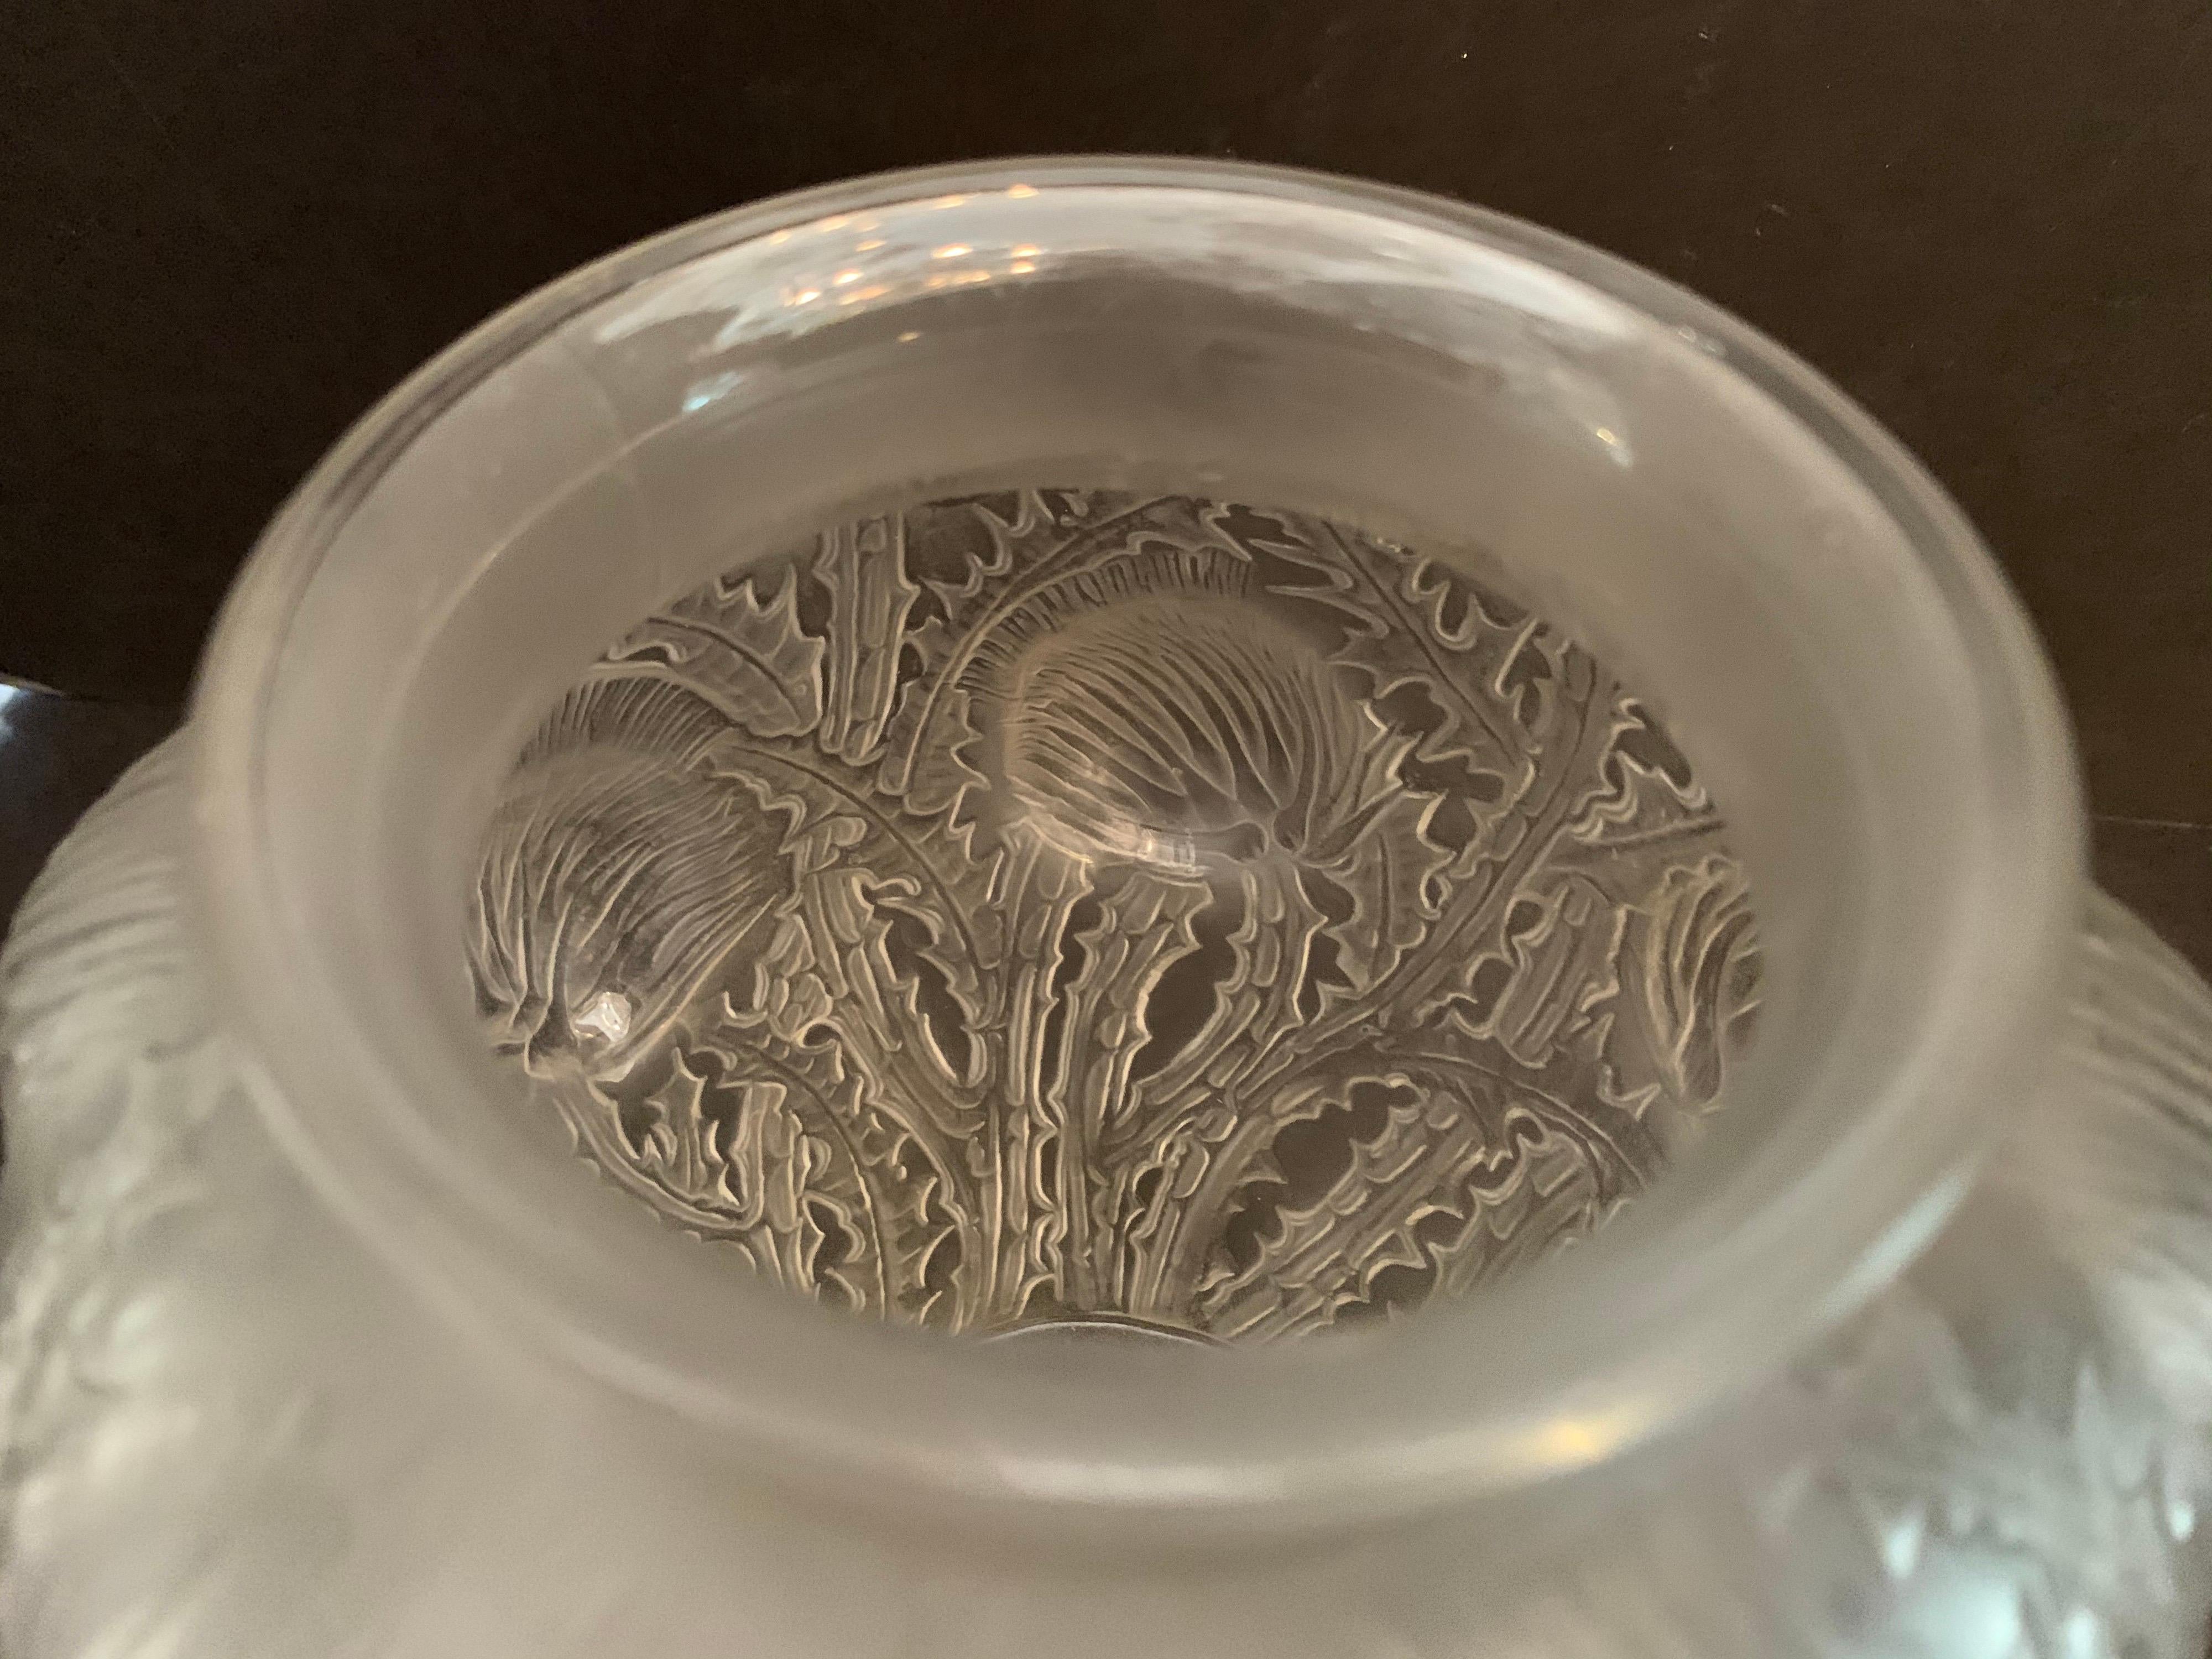 Wonderful Signed René Lalique Domremy Art Glass Flower Vase Marcilhac No. 979 In Good Condition For Sale In Roslyn, NY